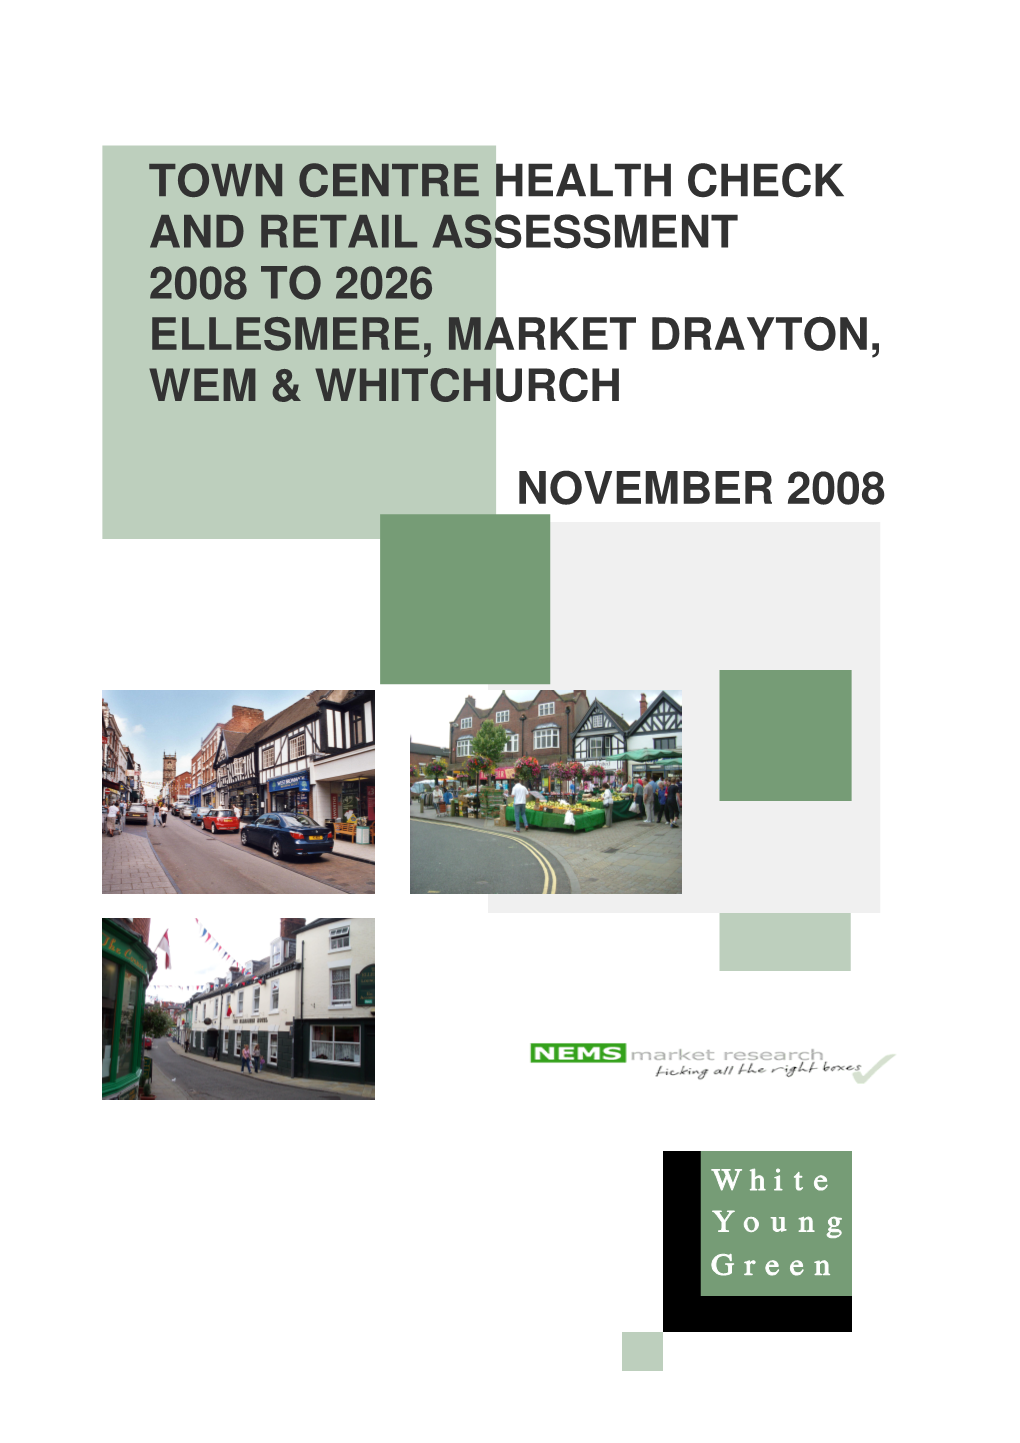 Town Centre Health Check and Retail Assessment 2008 to 2026 Ellesmere, Market Drayton, Wem & Whitchurch November 2008